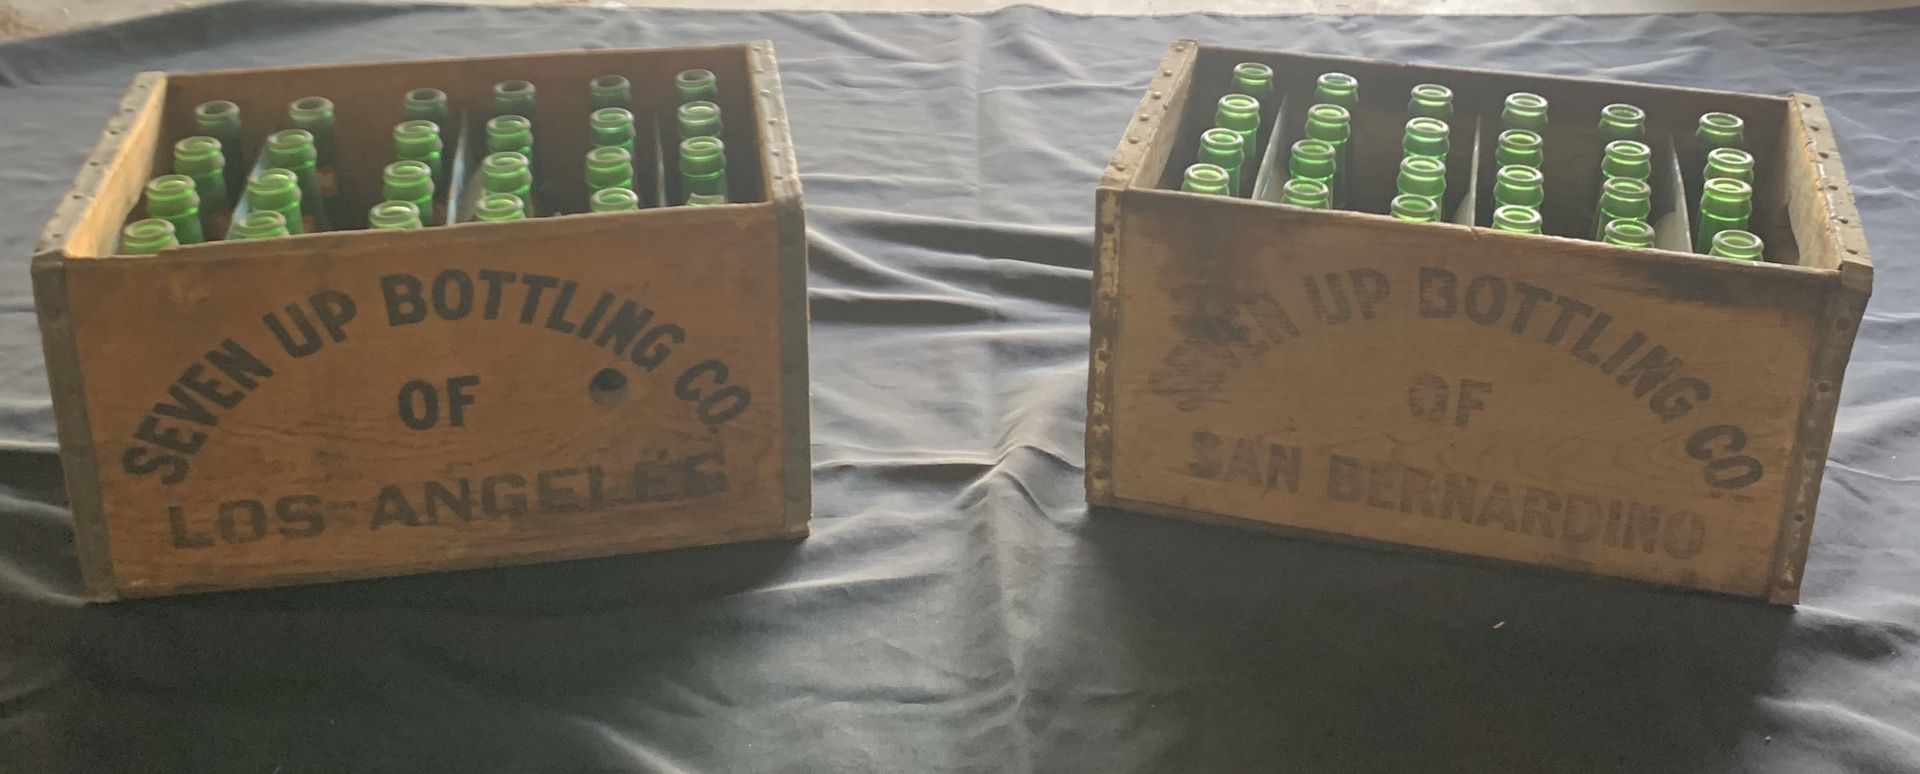 Antique 7-Up wood crates and bottles from Los Angeles and San Bernardino